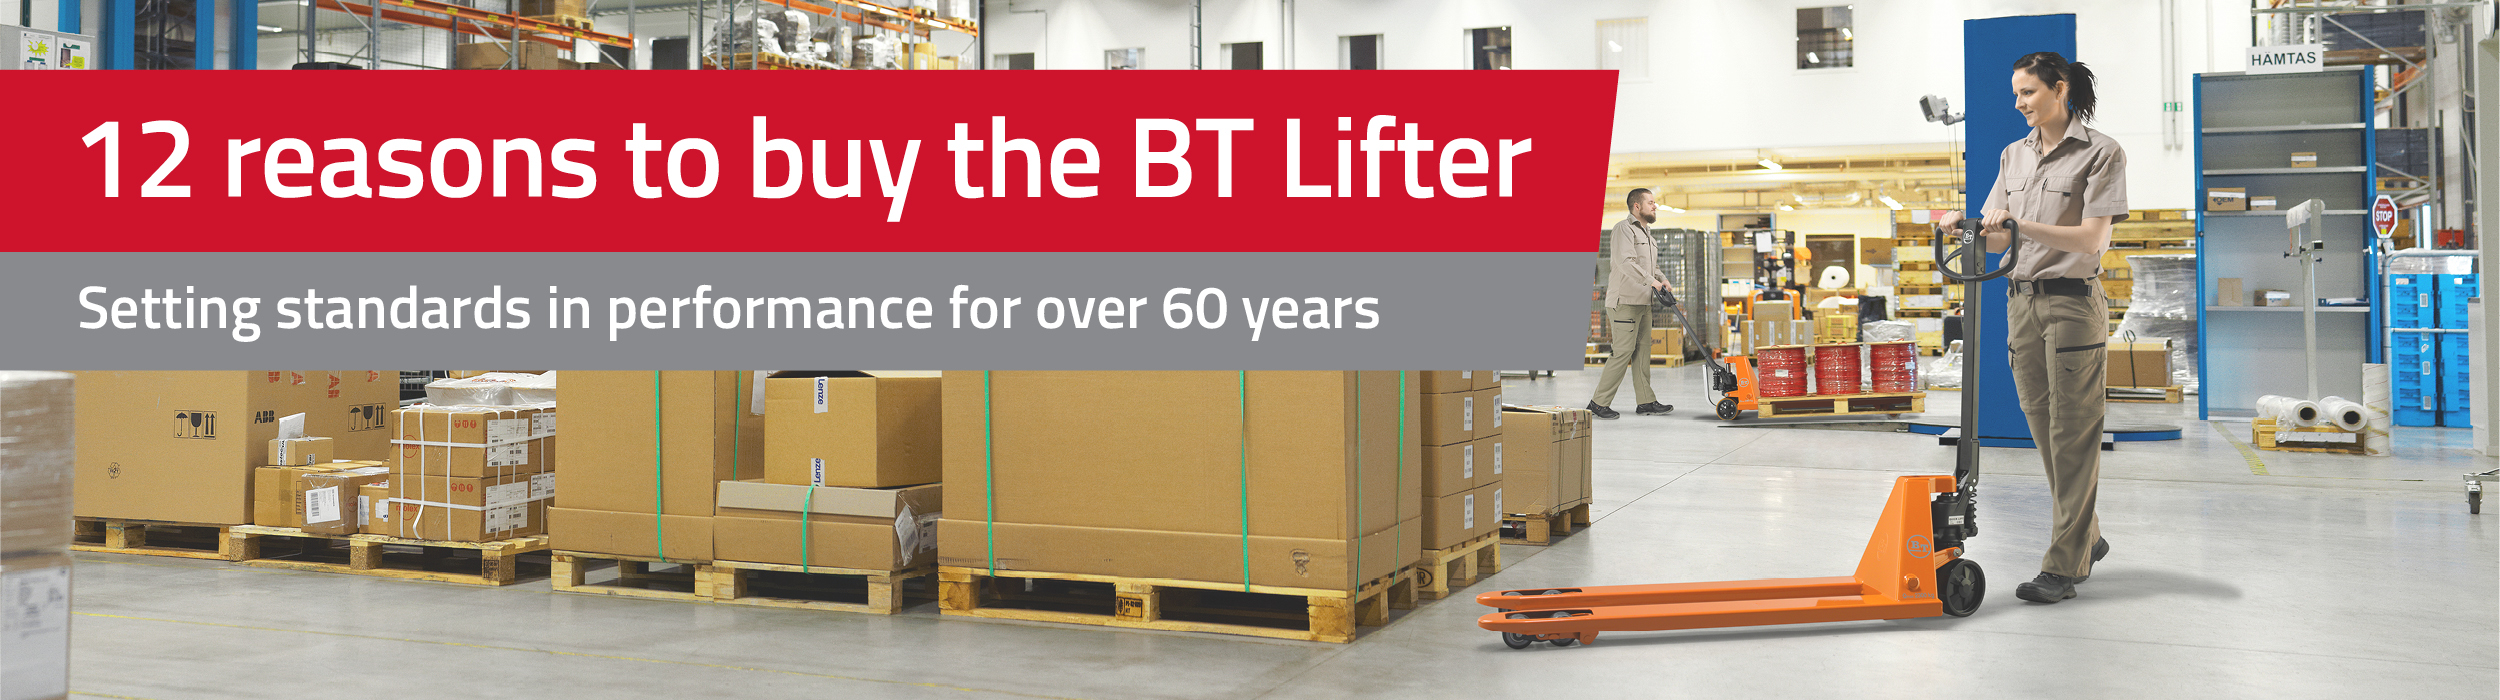 reasons to buy a bt lifter